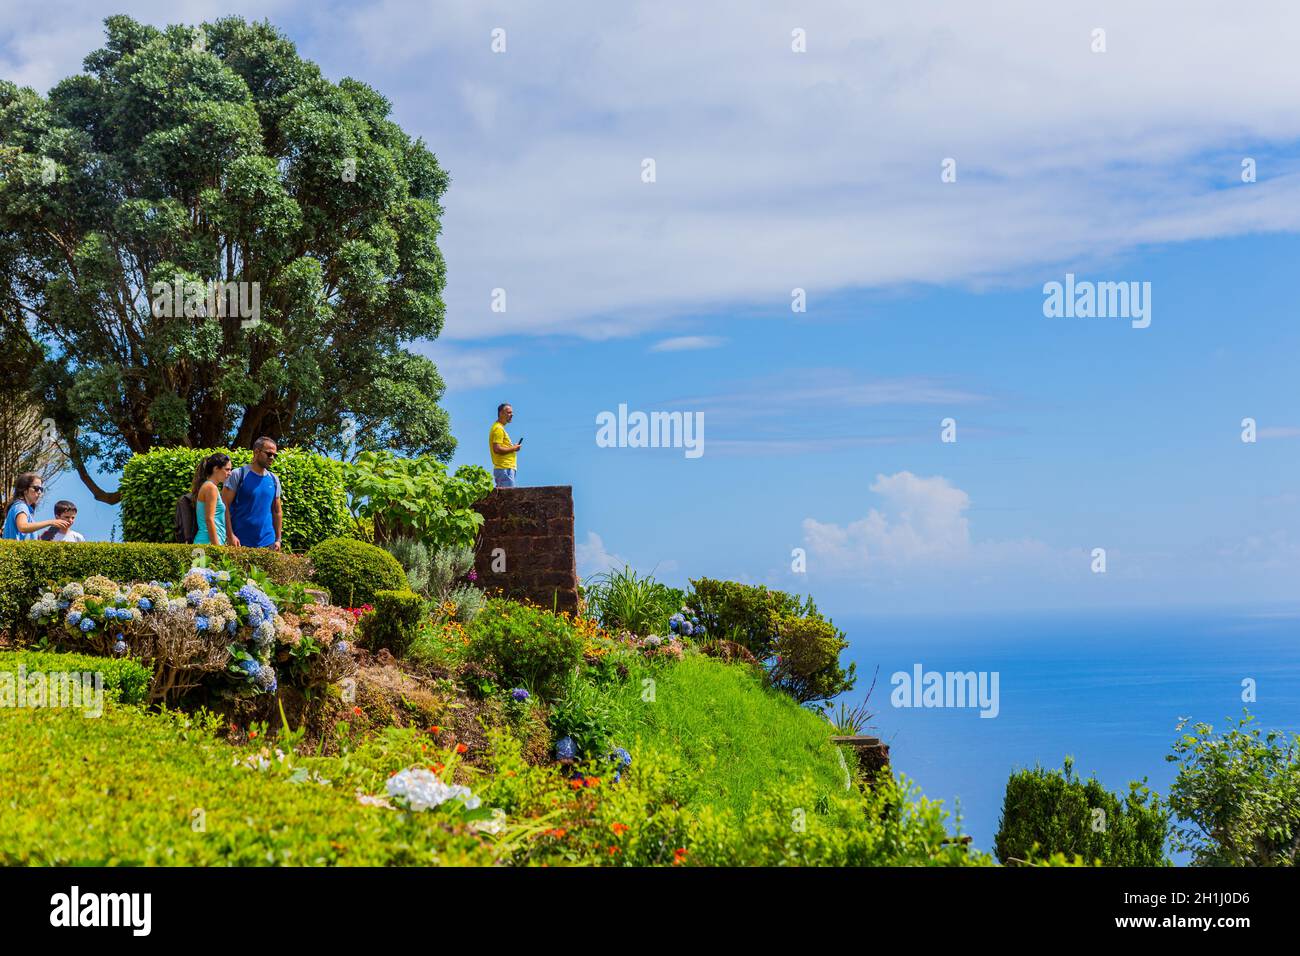 Sao Miguel island, Azores, Portugal - August 15, 2020: People at the Viewpoint of Ponta do Sossego. Amazingly point of interest in a major holiday des Stock Photo